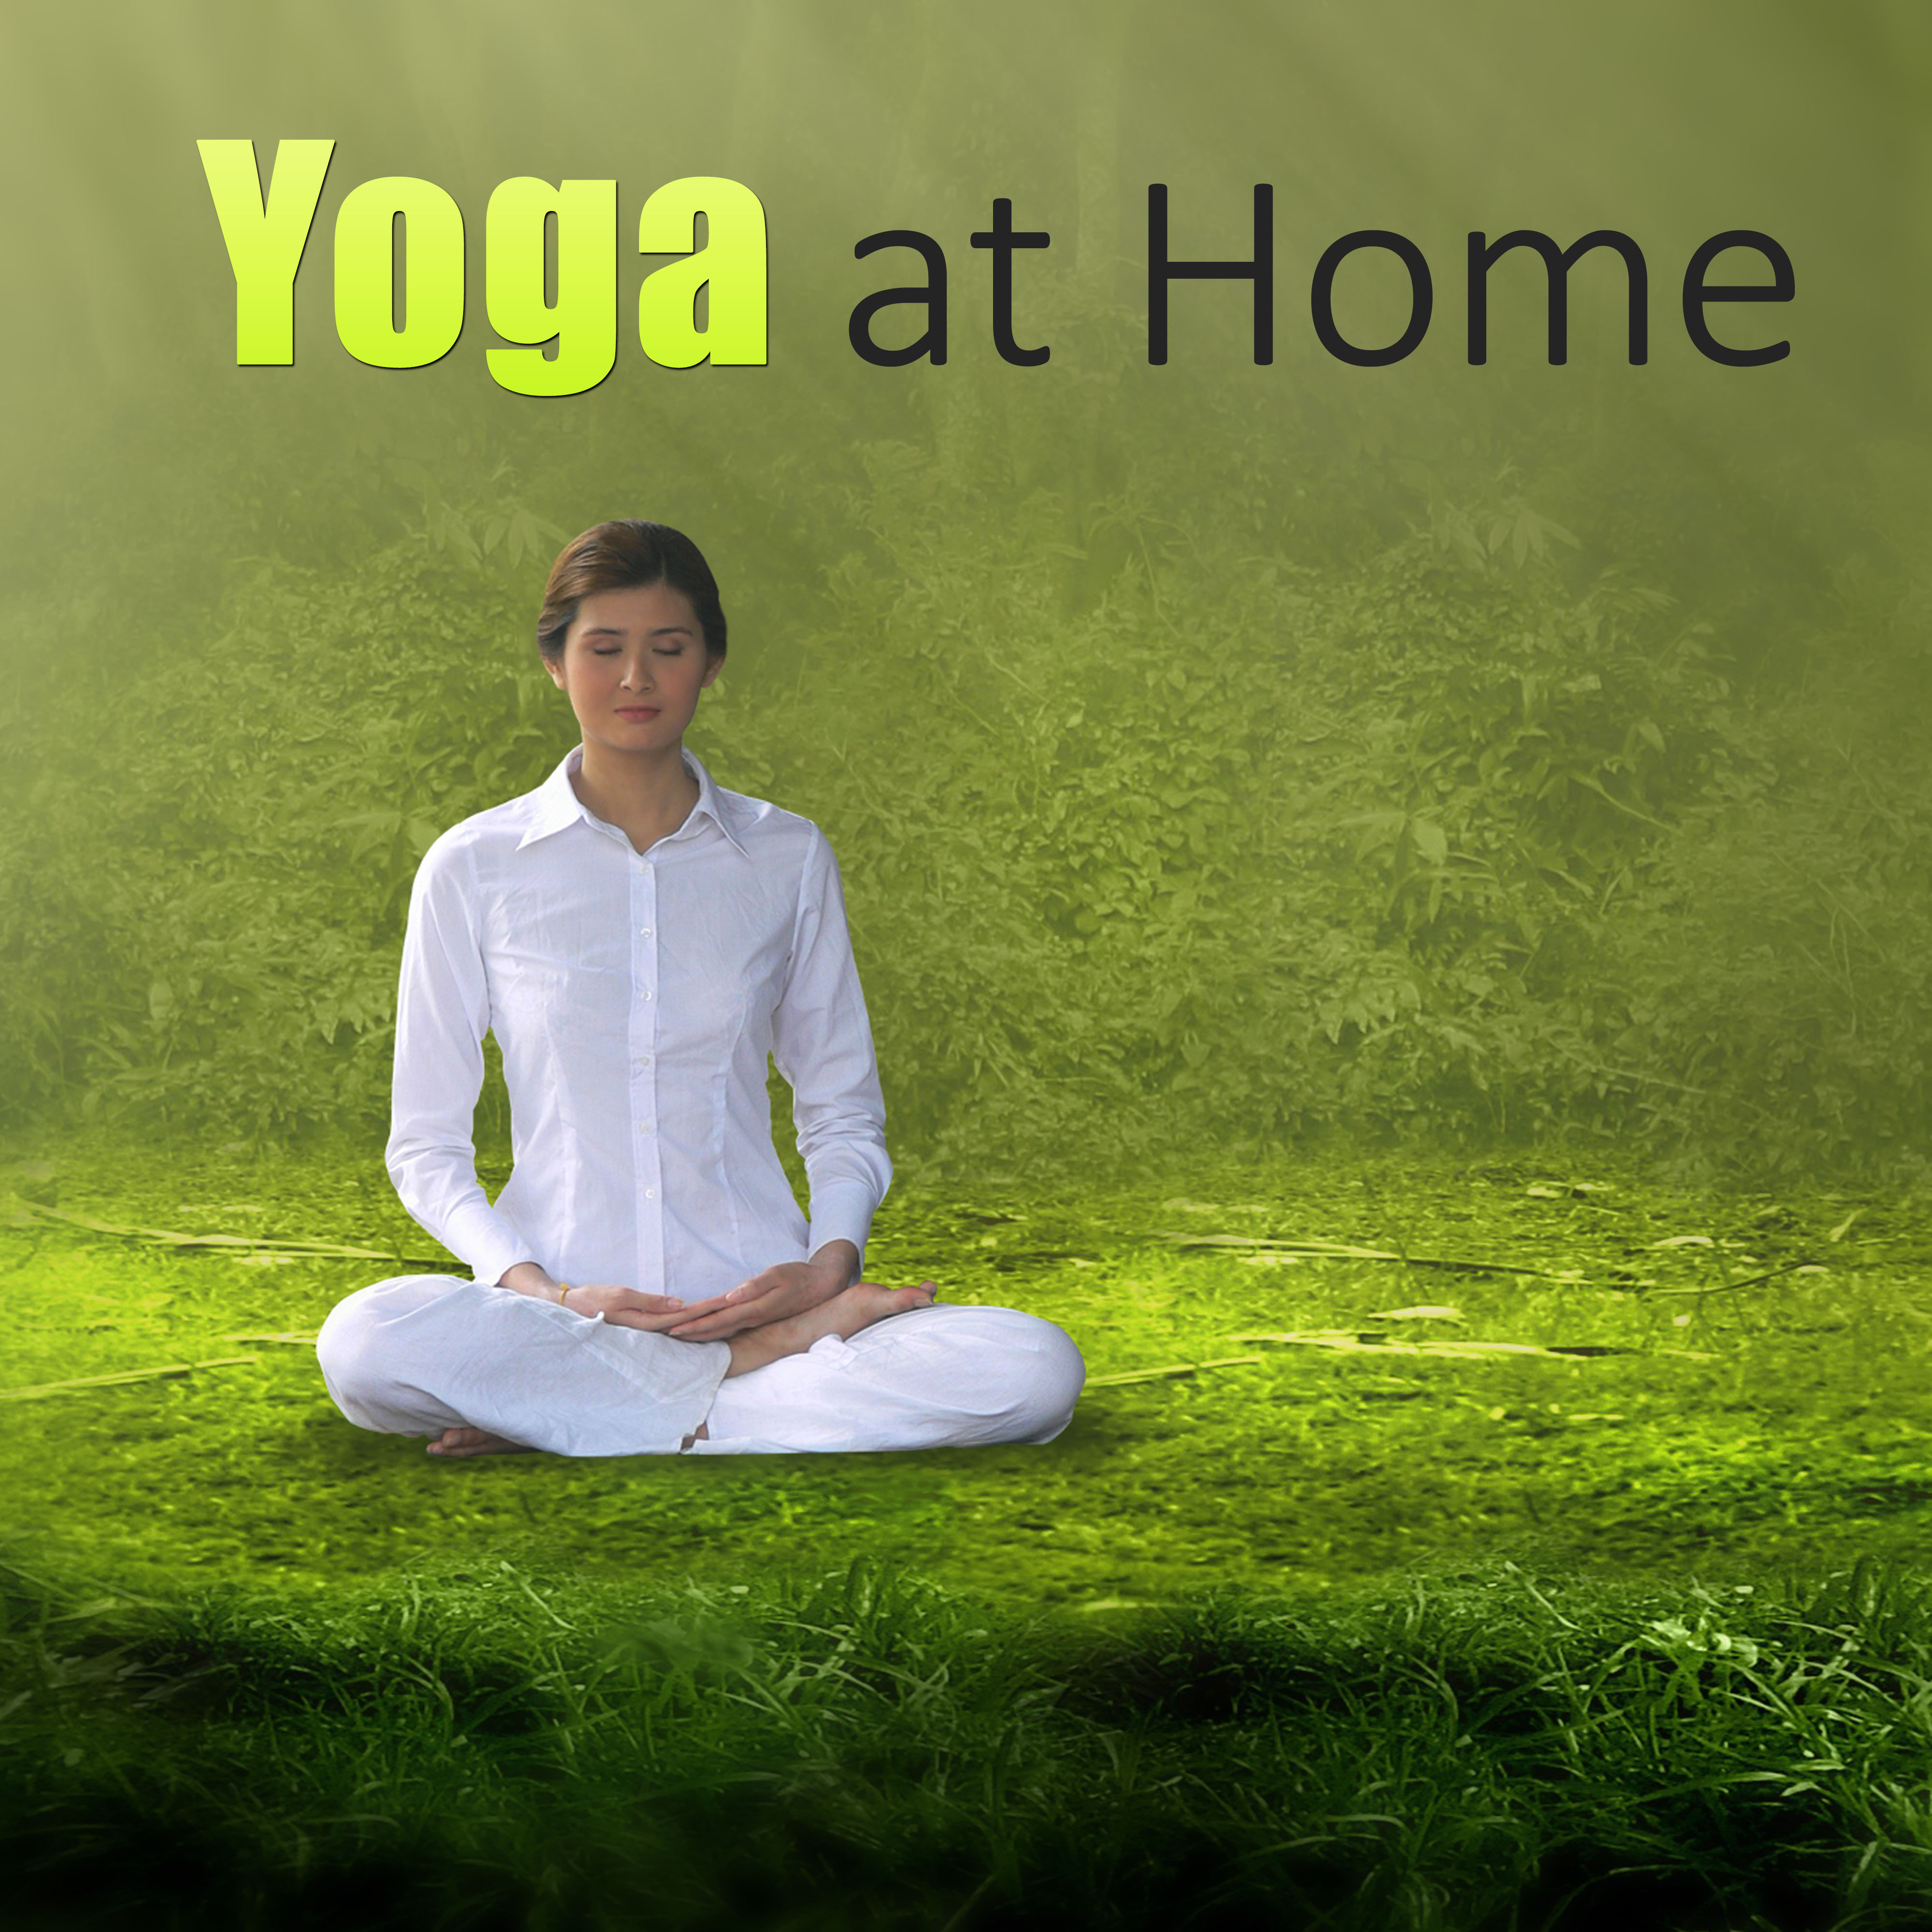 Yoga at Home – Relax with Yoga Music at Your Home, New Age Serene Music for Yoga Exercises & Meditation, Yoga for Development Inner Power, Pilates for Healthy Lifestyle